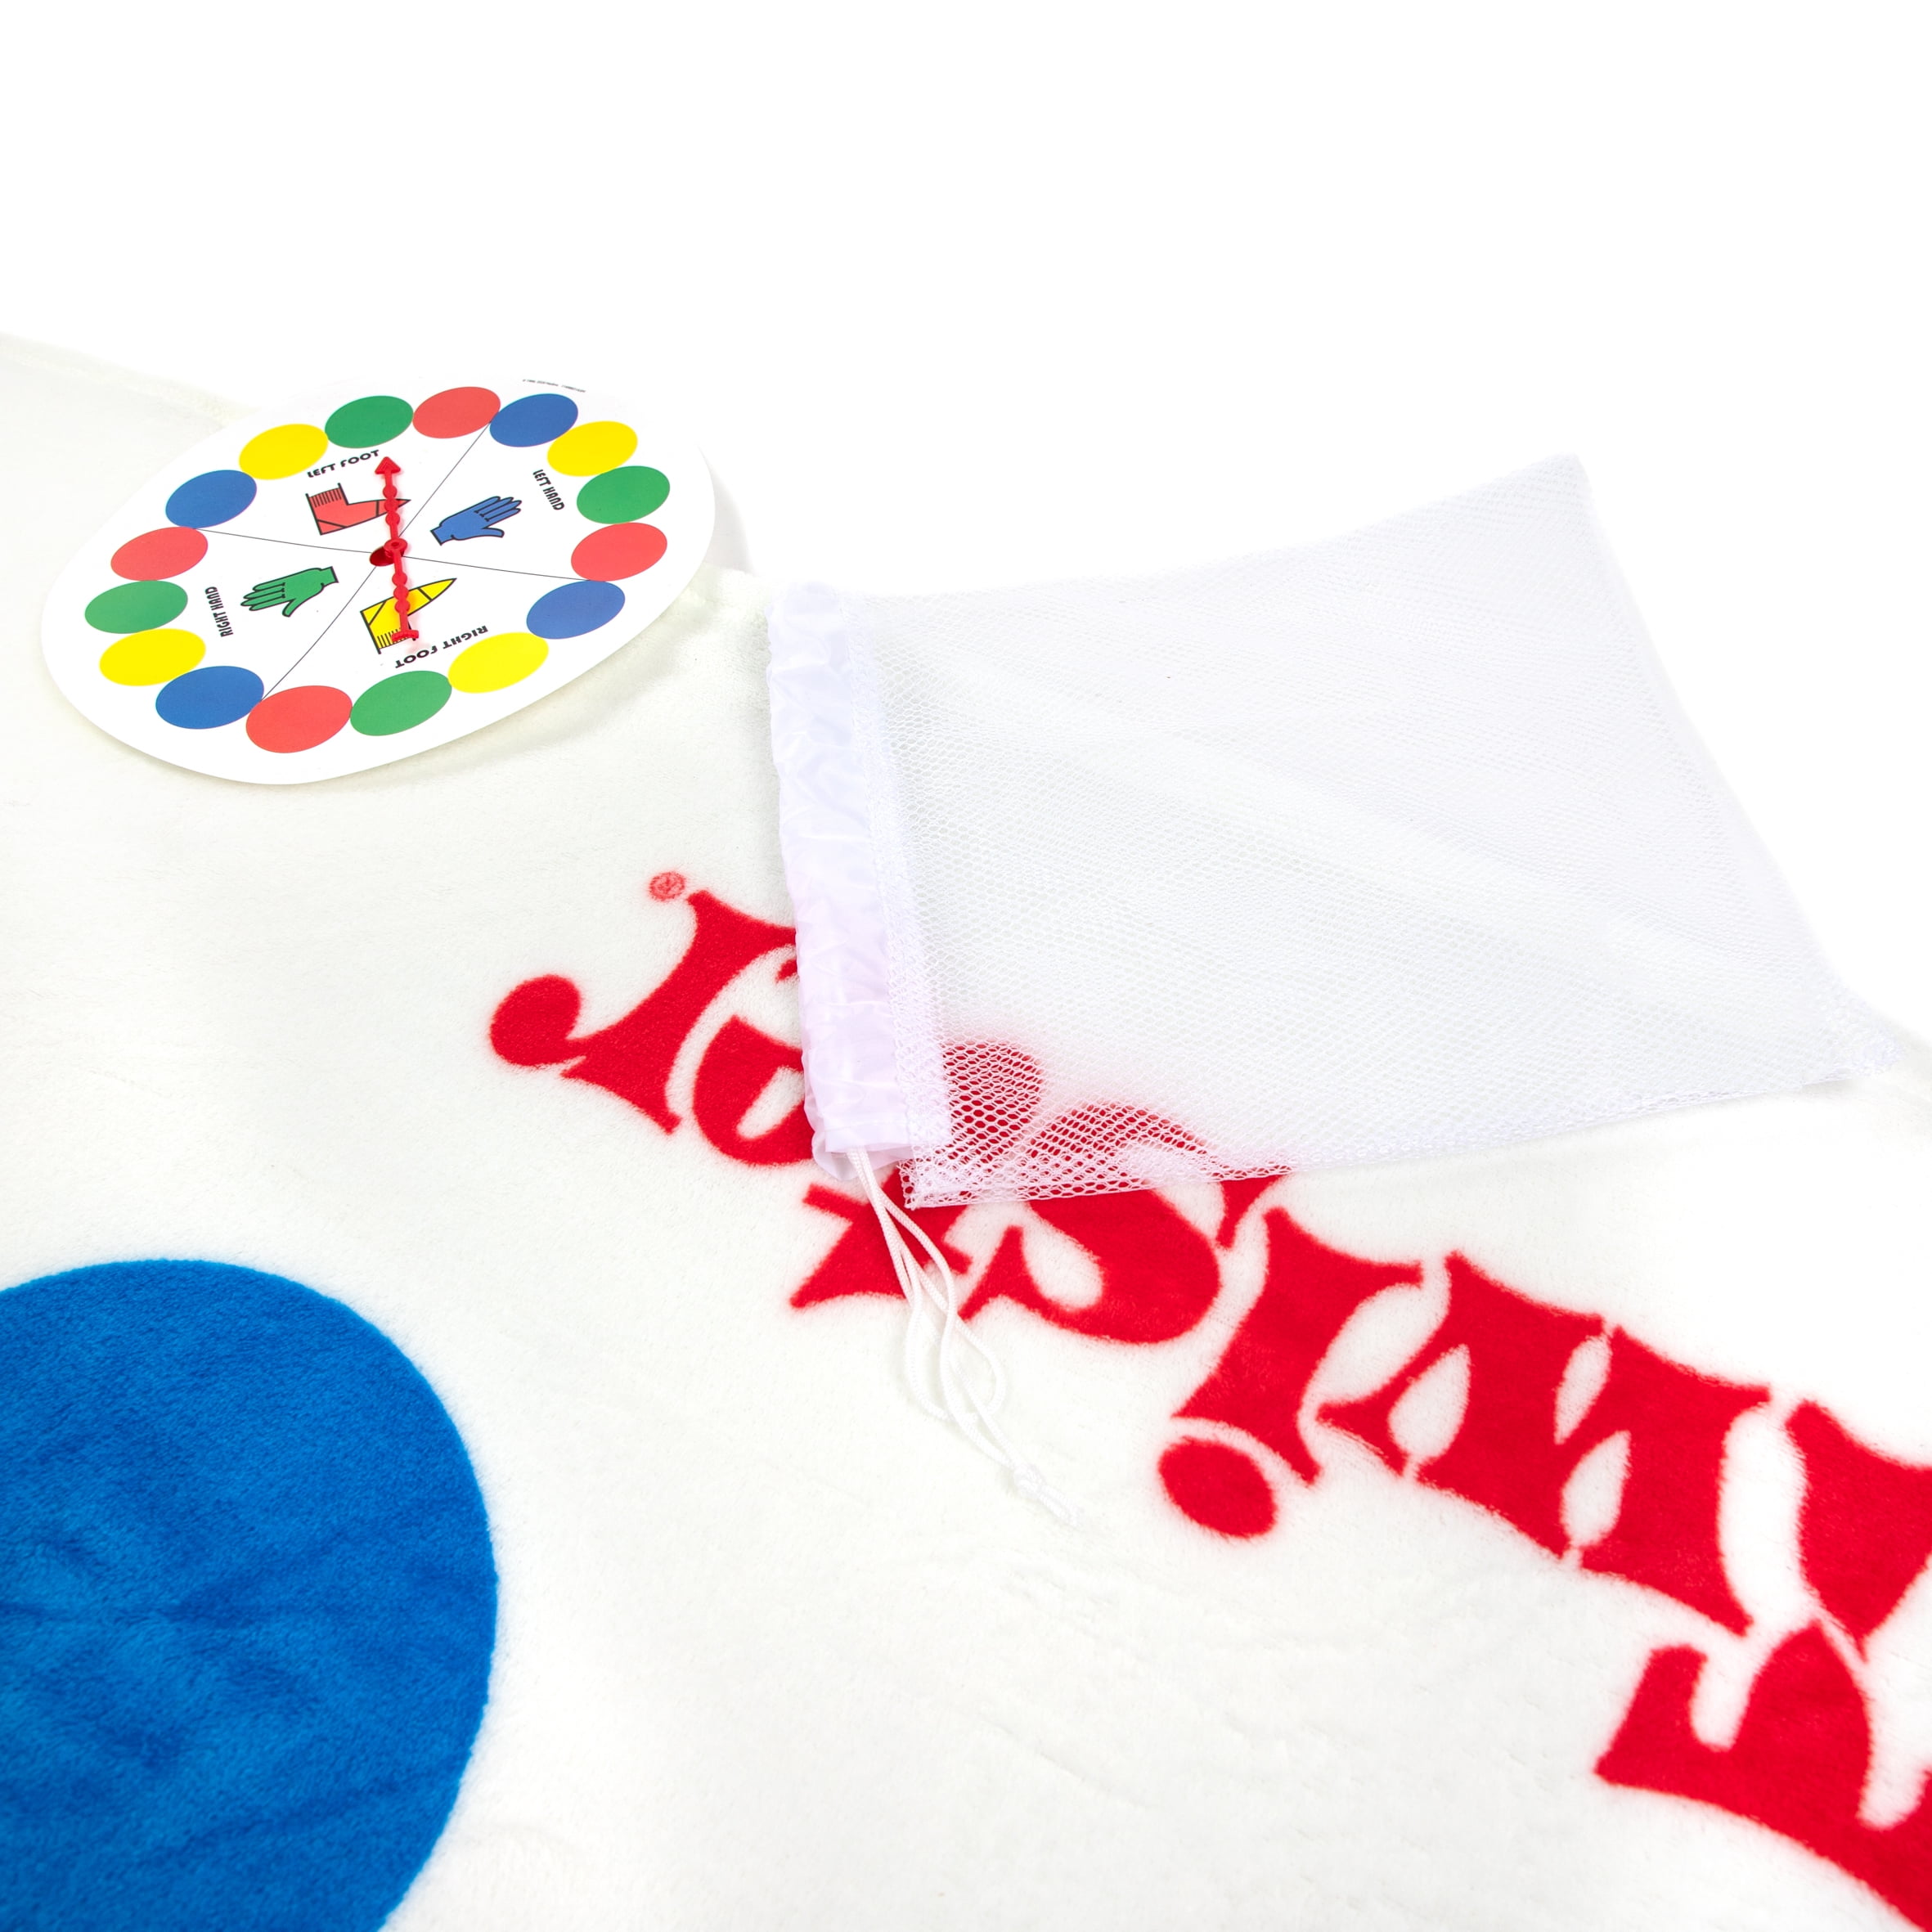 CLOSEOUT! Twister Game Blanket